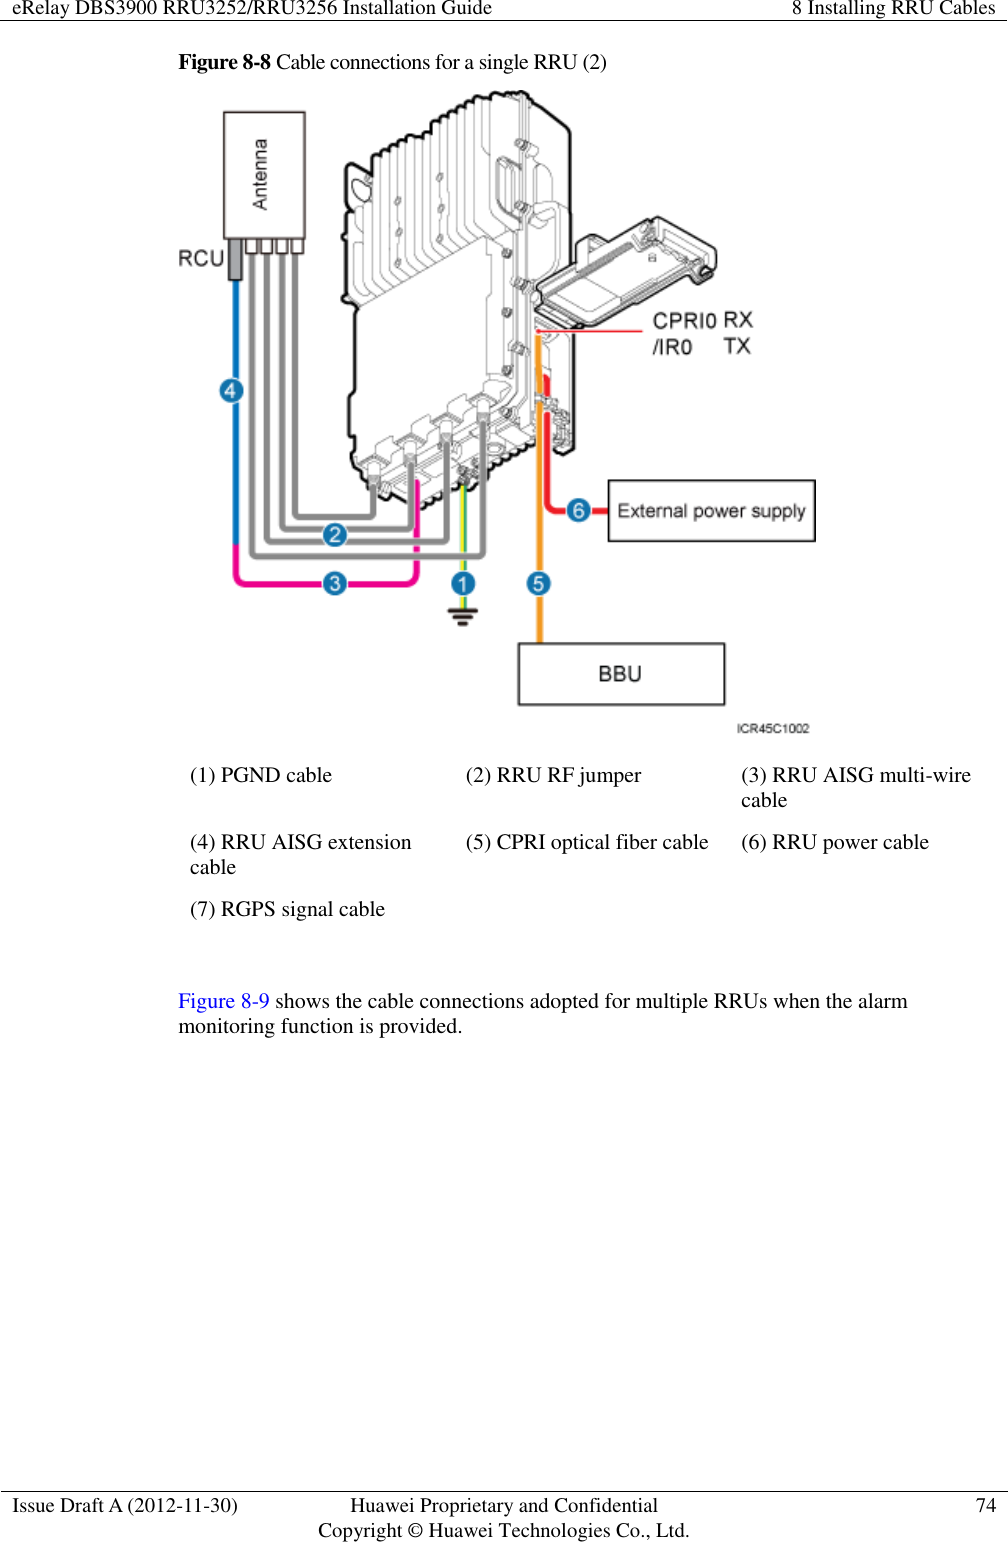 eRelay DBS3900 RRU3252/RRU3256 Installation Guide 8 Installing RRU Cables  Issue Draft A (2012-11-30) Huawei Proprietary and Confidential                                     Copyright © Huawei Technologies Co., Ltd. 74  Figure 8-8 Cable connections for a single RRU (2)  (1) PGND cable (2) RRU RF jumper (3) RRU AISG multi-wire cable (4) RRU AISG extension cable (5) CPRI optical fiber cable   (6) RRU power cable (7) RGPS signal cable    Figure 8-9 shows the cable connections adopted for multiple RRUs when the alarm monitoring function is provided. 